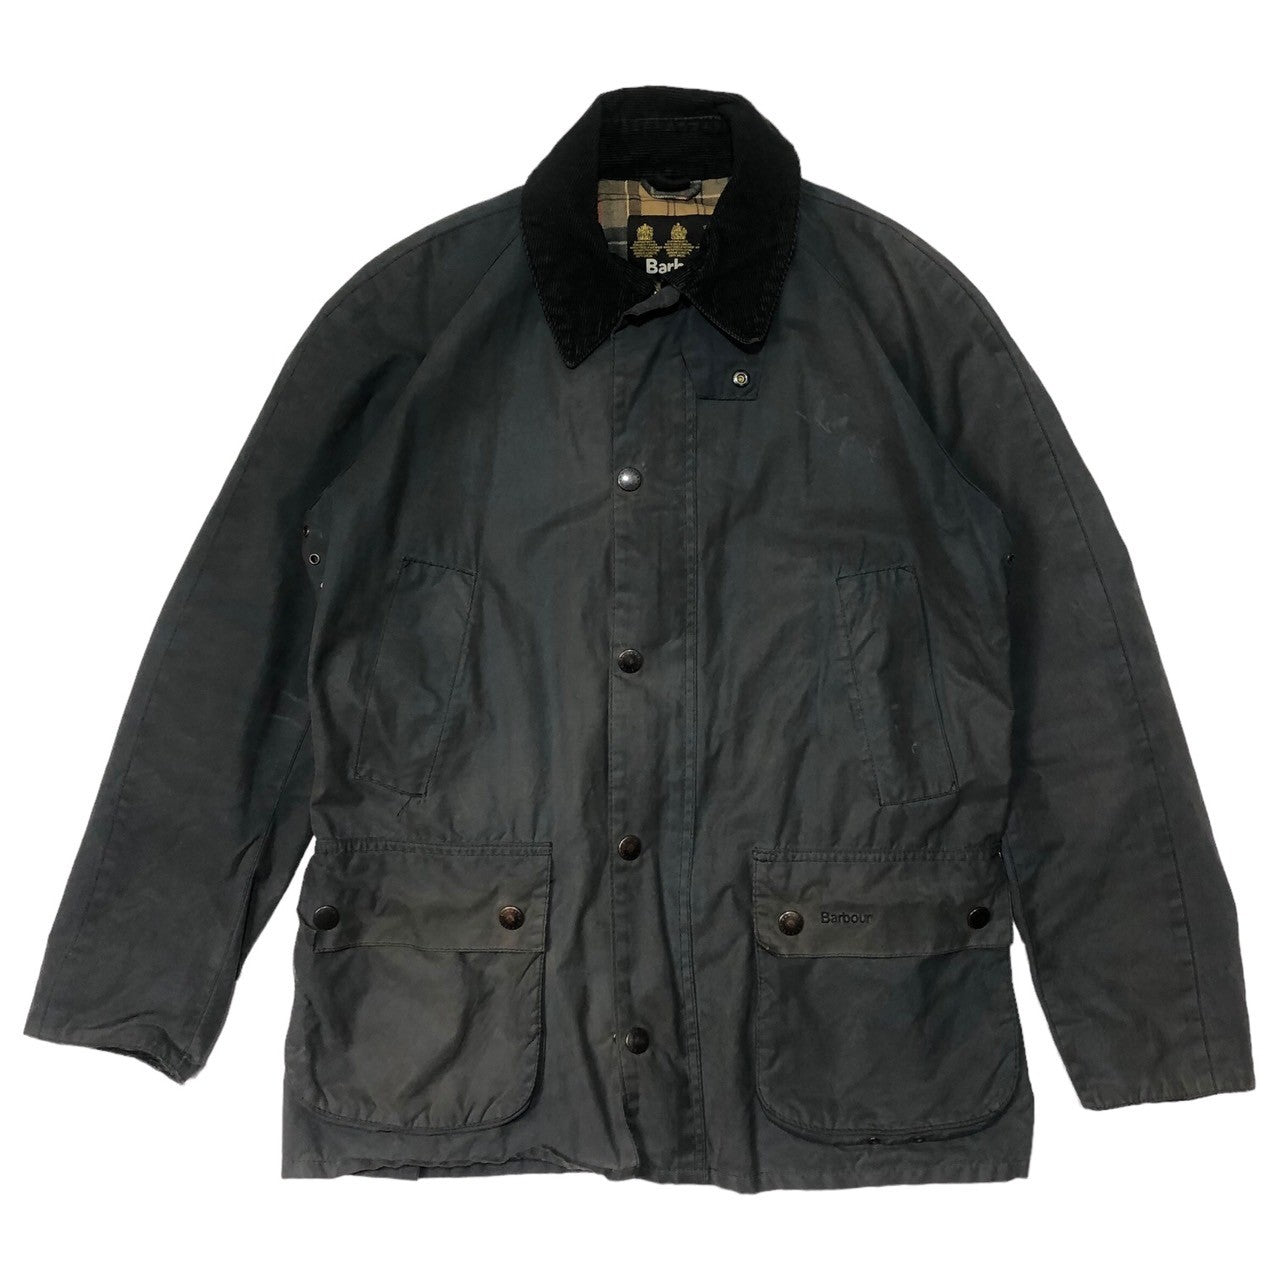 Barbour(バブアー) ASHBY WAX JACKET アシュビー オイルドジャケット  MWX0339NY92 SIZE S グレー 裏地 チェック